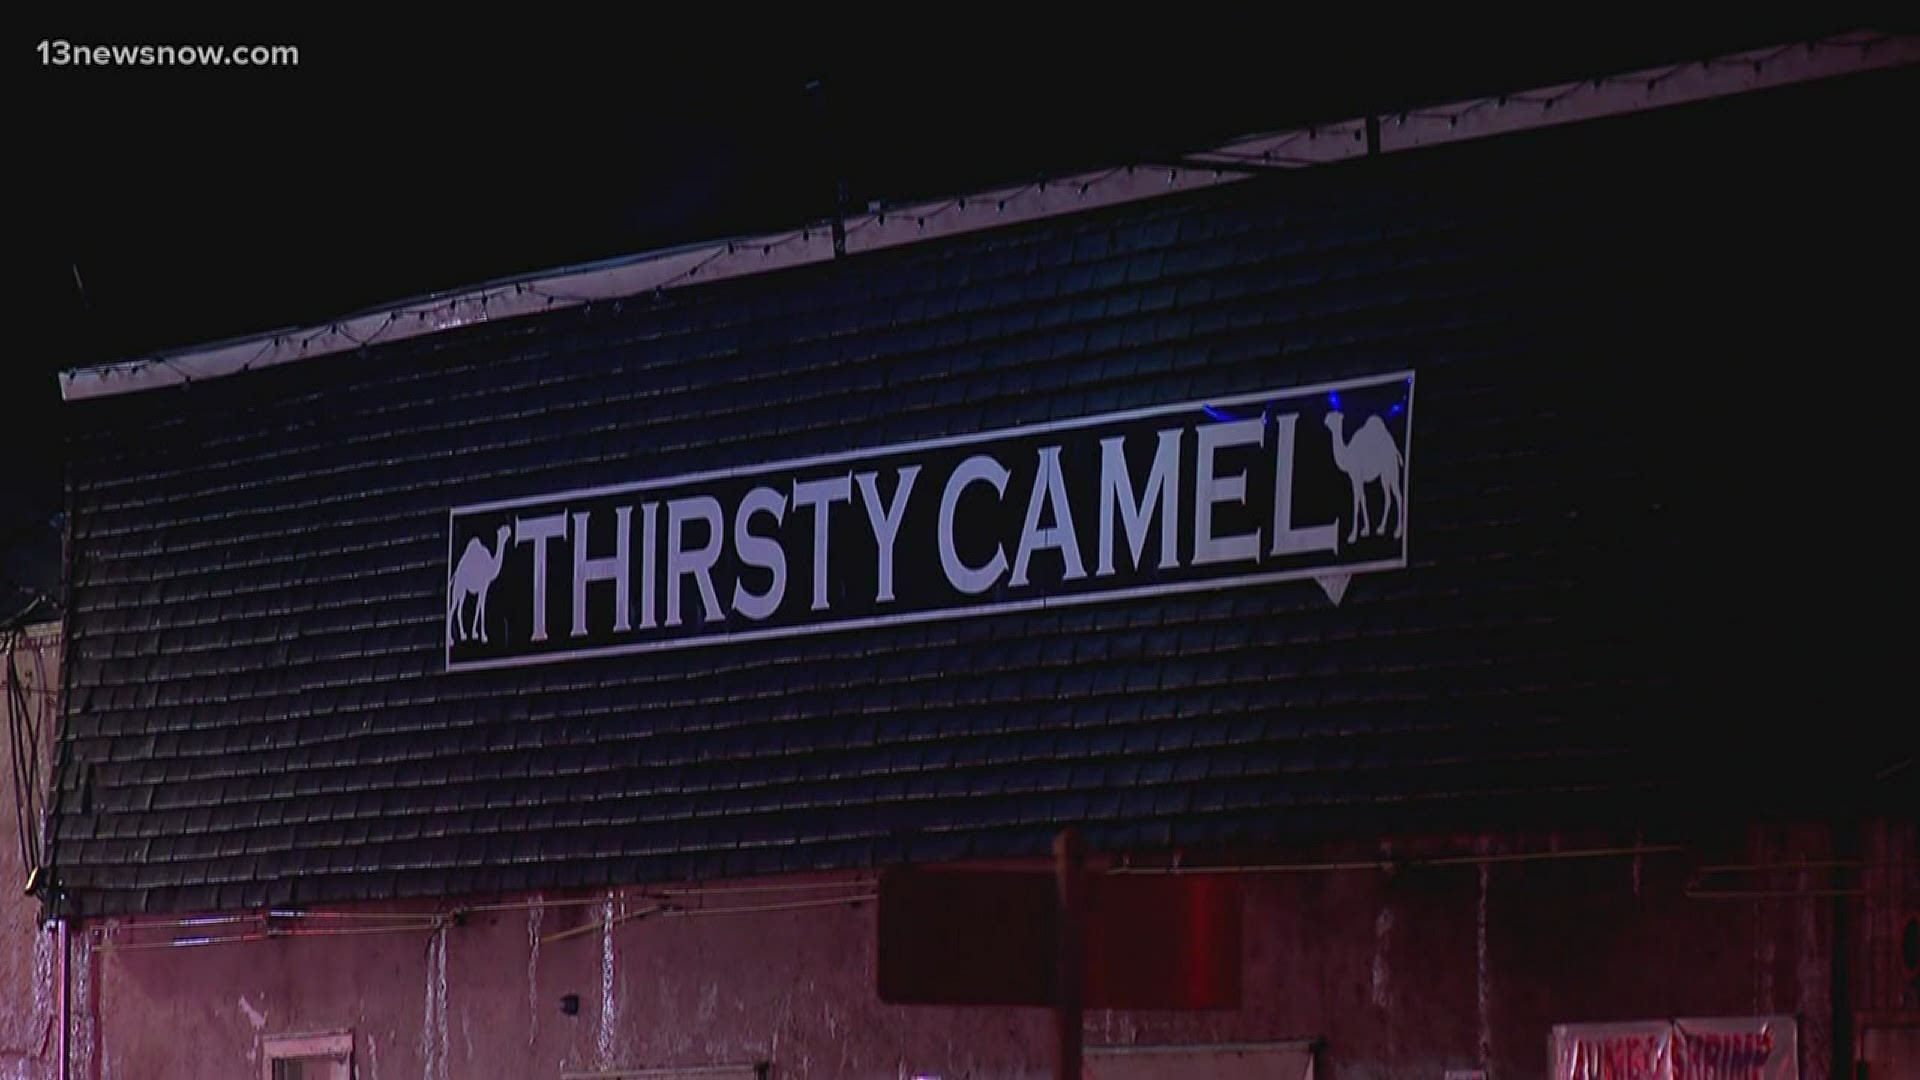 The Thirsty Camel bar and restaurant, a popular Norfolk landmark, burnt down in an early morning fire on April 16, 2020. The building was declared "a total loss."